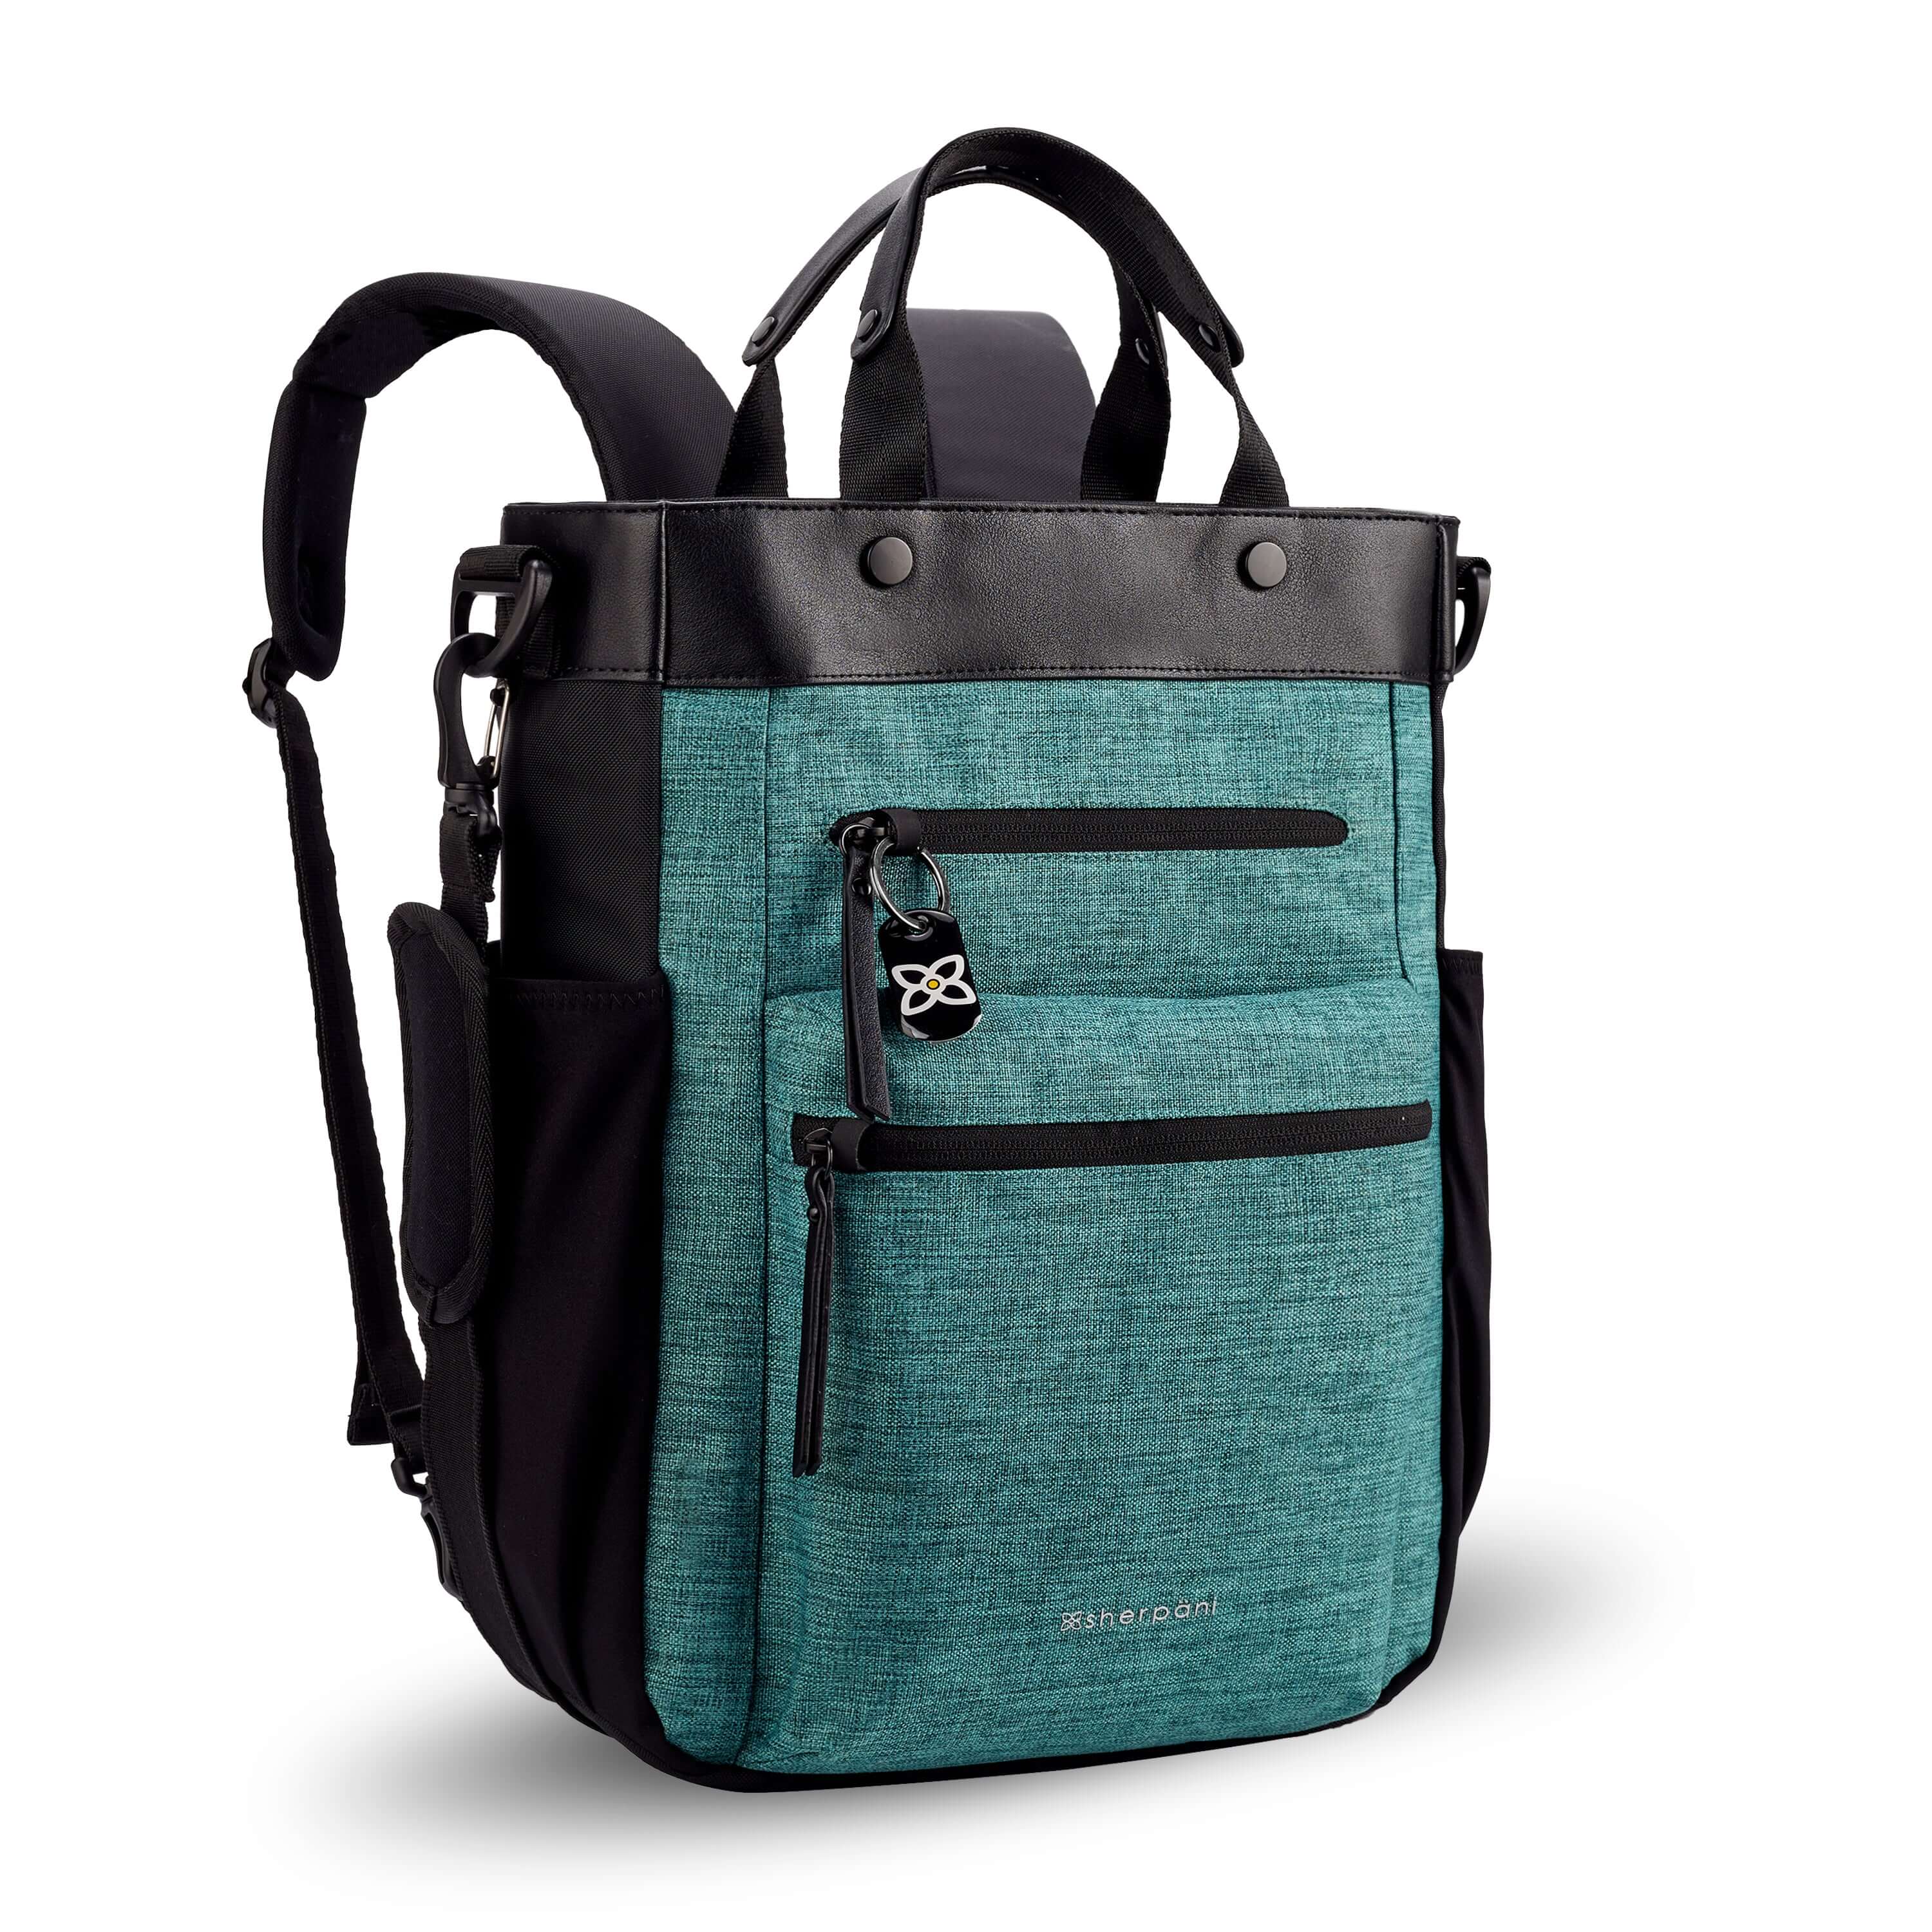 Angled front view of Sherpani's Anti-Theft bag, the Soleil AT in Teal, with vegan leather accents in black. On the front are two locking zipper compartments, a ReturnMe tag is clipped to the upper one. Two elastic water bottle holders sit on either side of the bag. It has padded backpack straps, short tote handles, and an adjustable/detachable crossbody strap. 